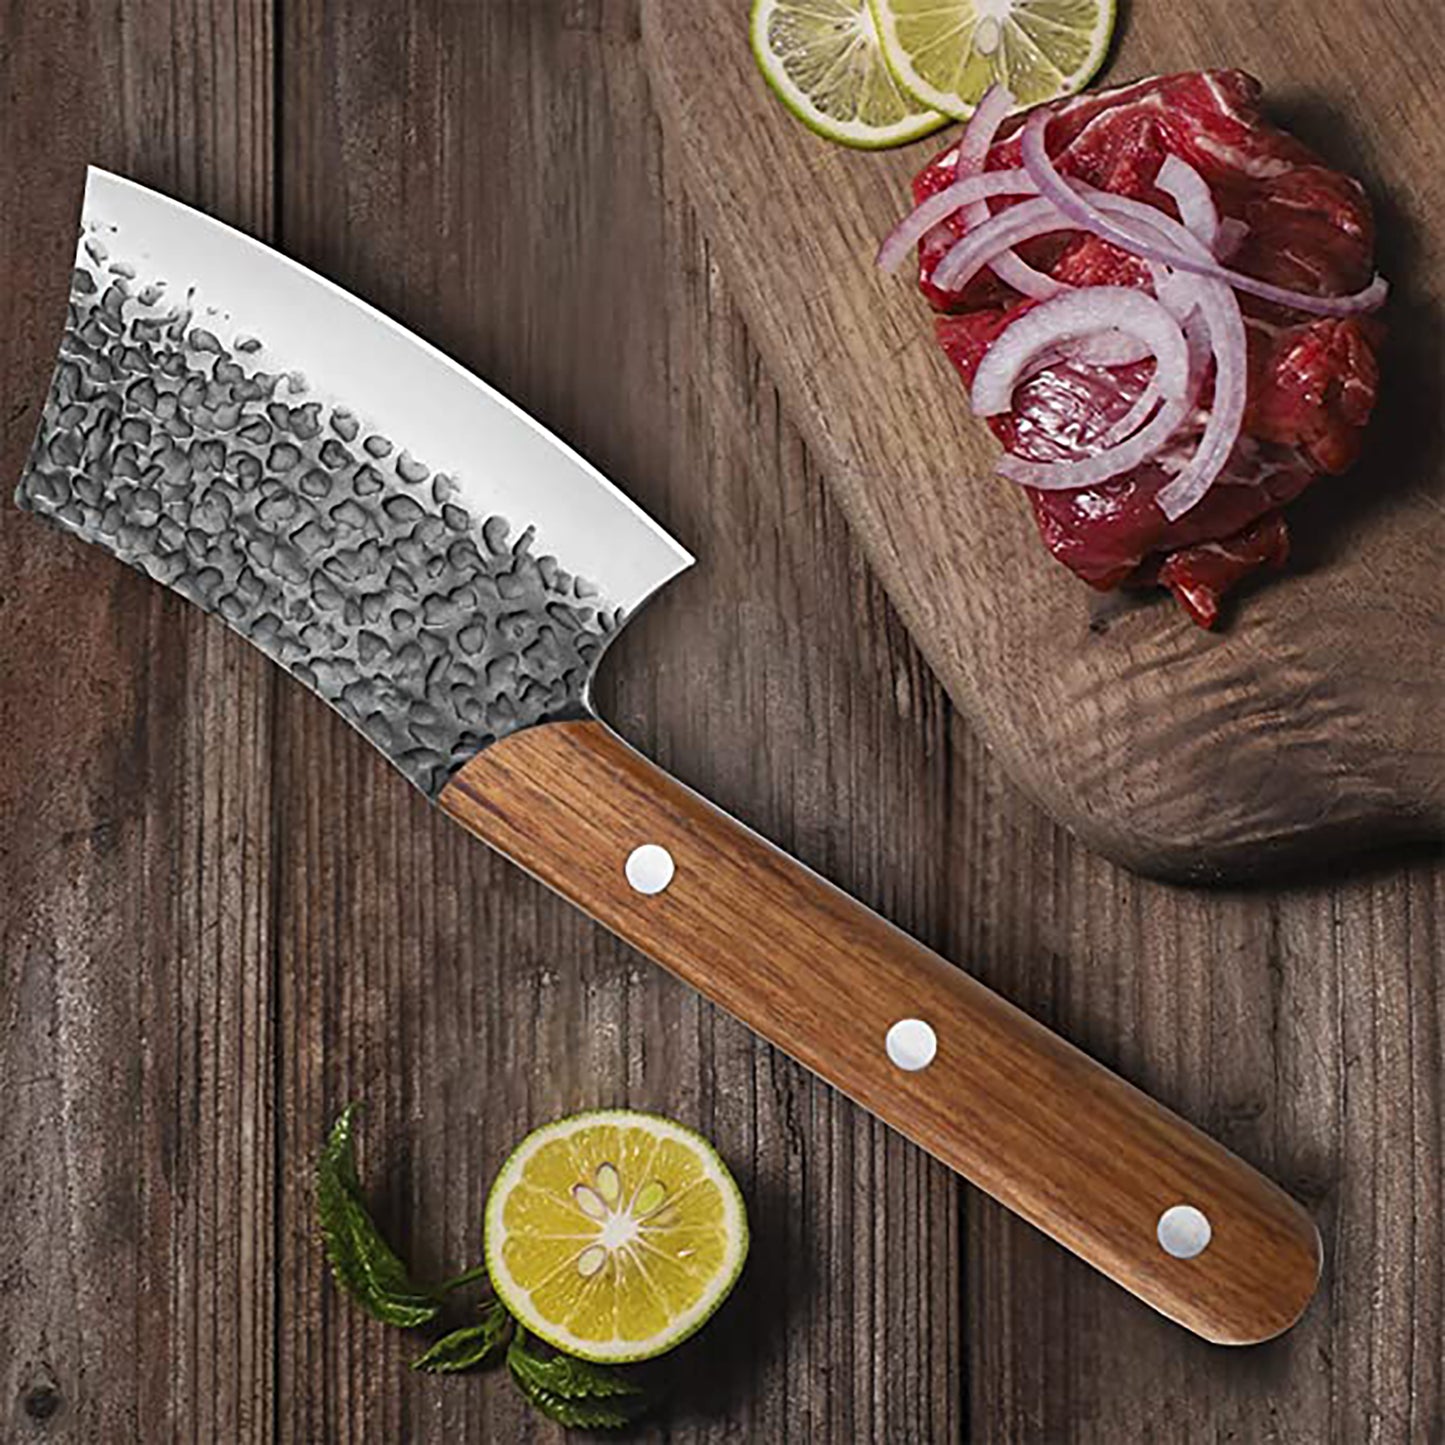 Kitory Little Multi-functional Steak Knife  5 Inch Small Blade